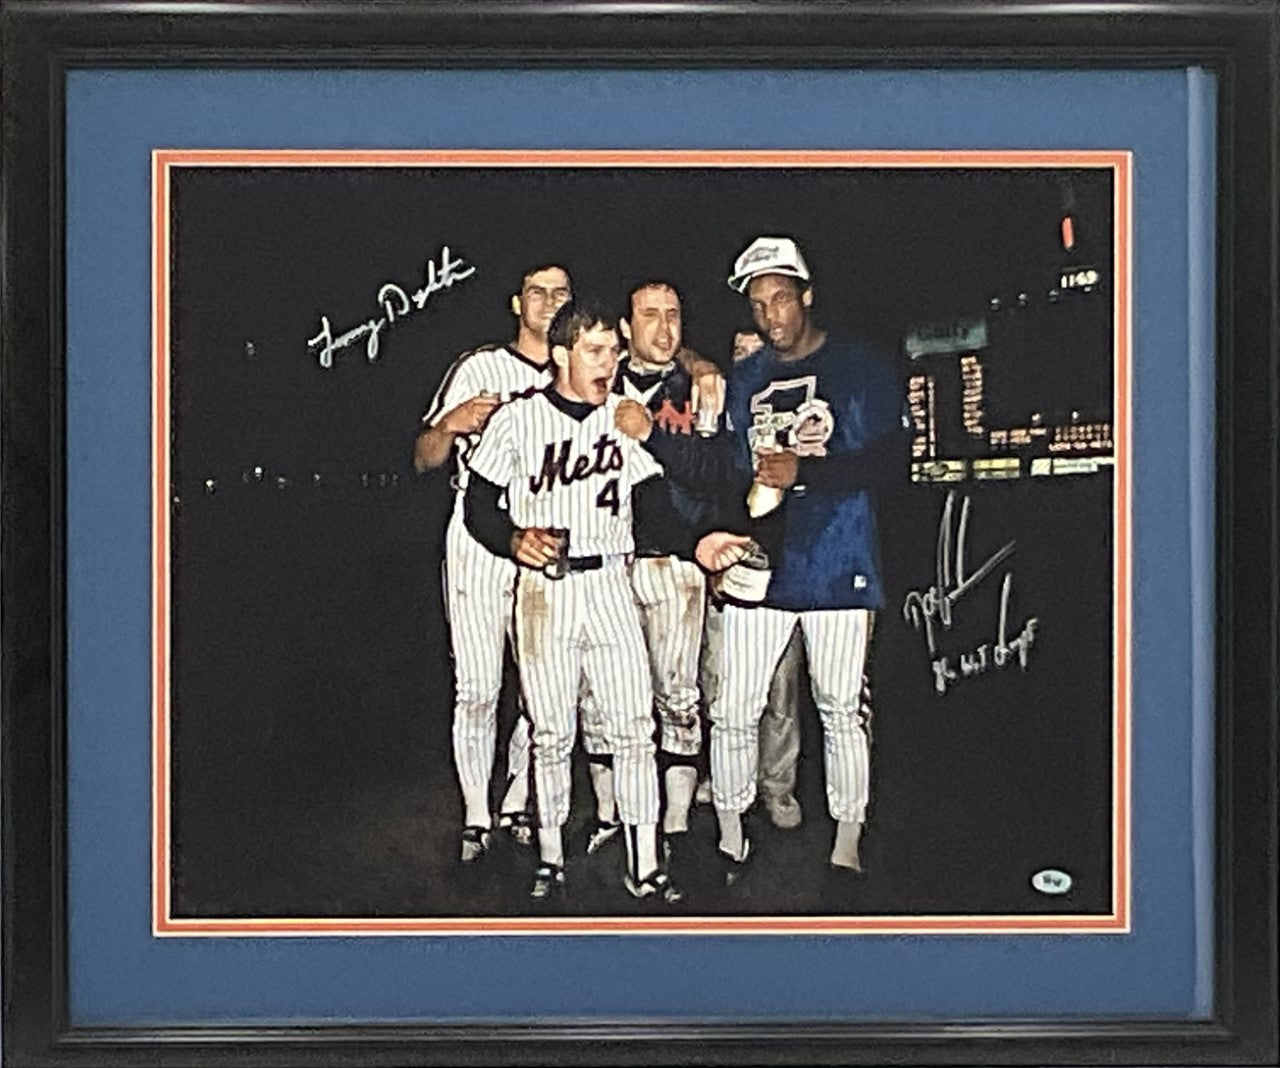 Dykstra & Gooden New York Mets Autographed 16x20 Photo Framed - Sports  Vault Shop